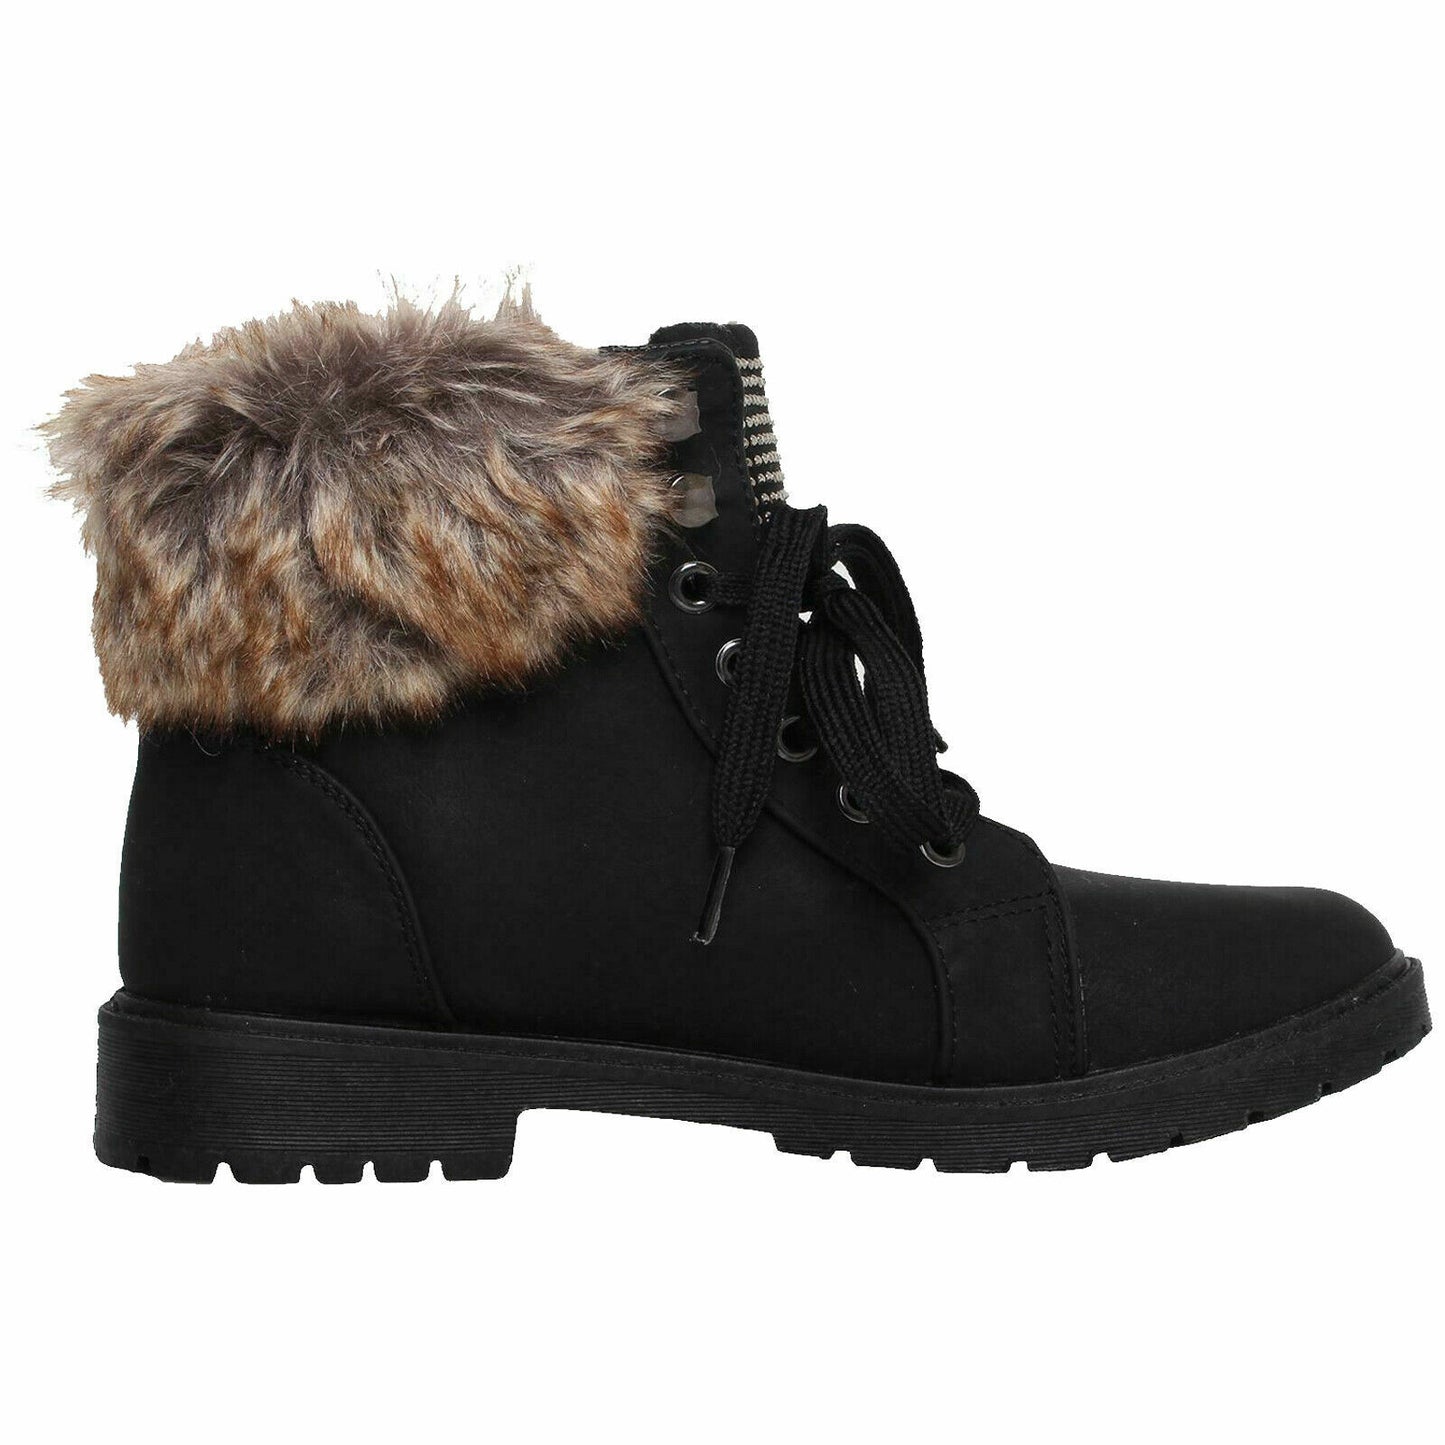 WOMEN FAUX FUR LINING LACE UP WARM WINTER GRIP SOLE TONGUE STYLE ARMY BOOT SHOES